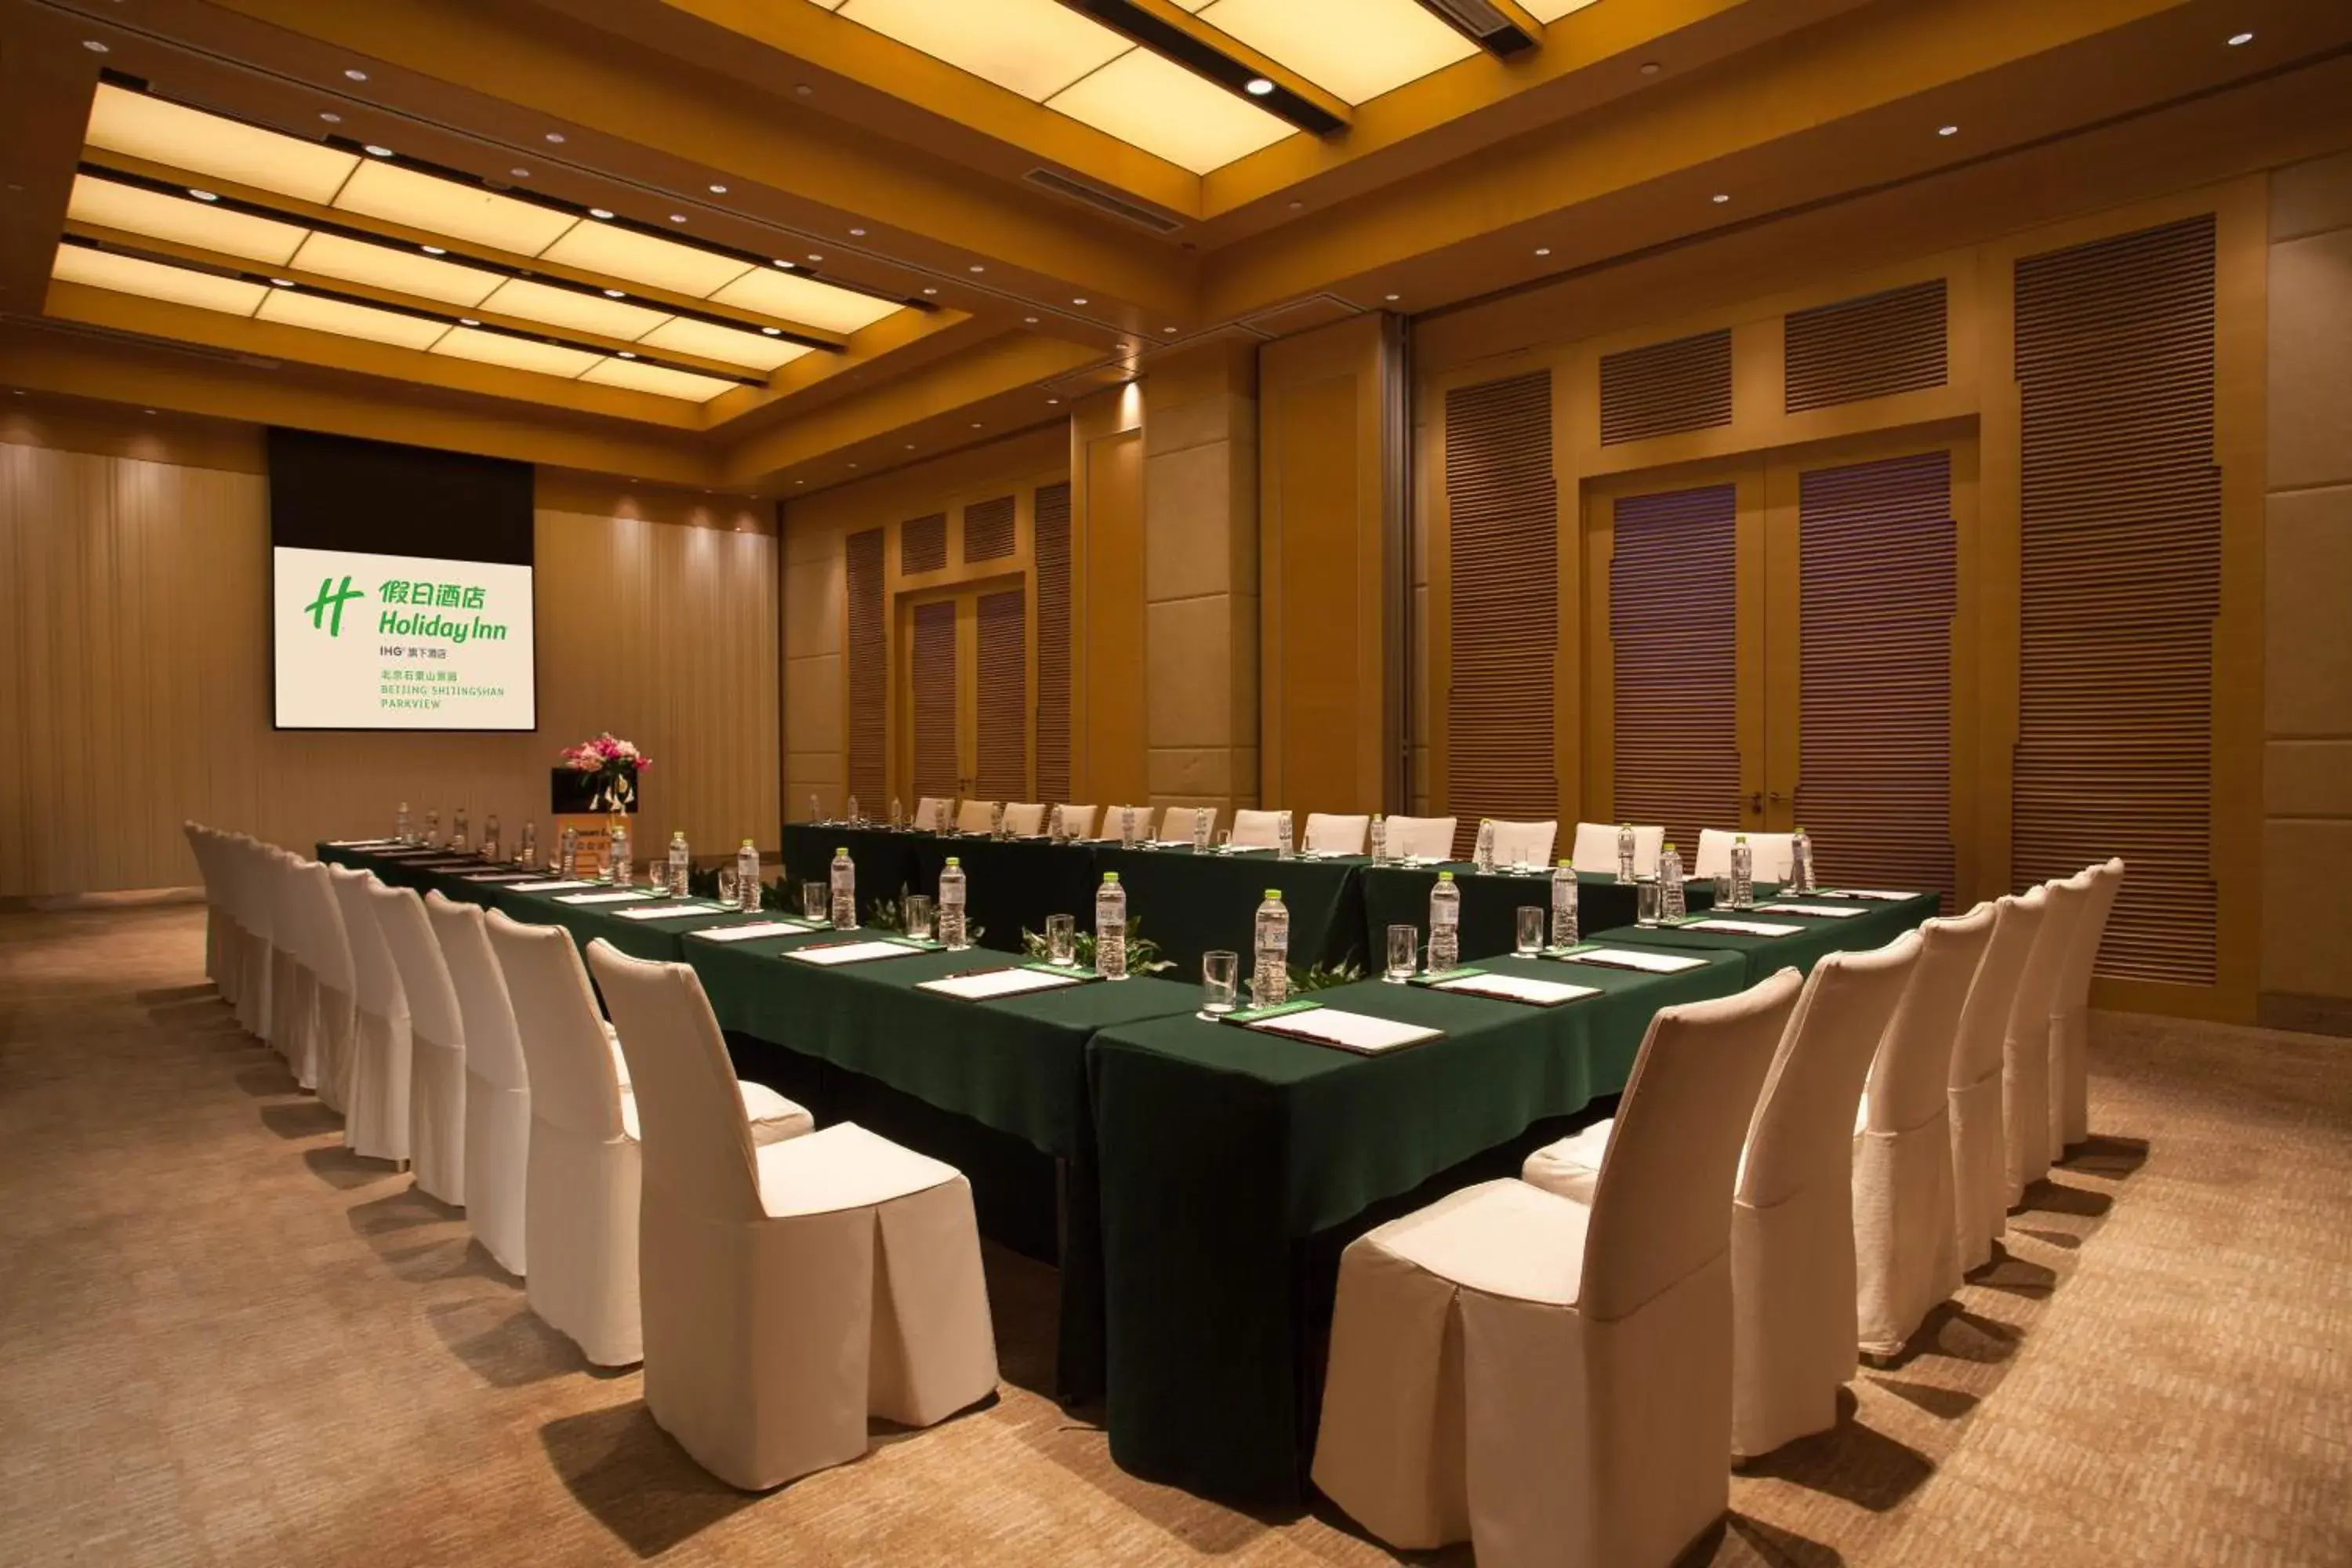 Meeting/conference room in Holiday Inn Beijing Shijingshan Parkview, an IHG Hotel